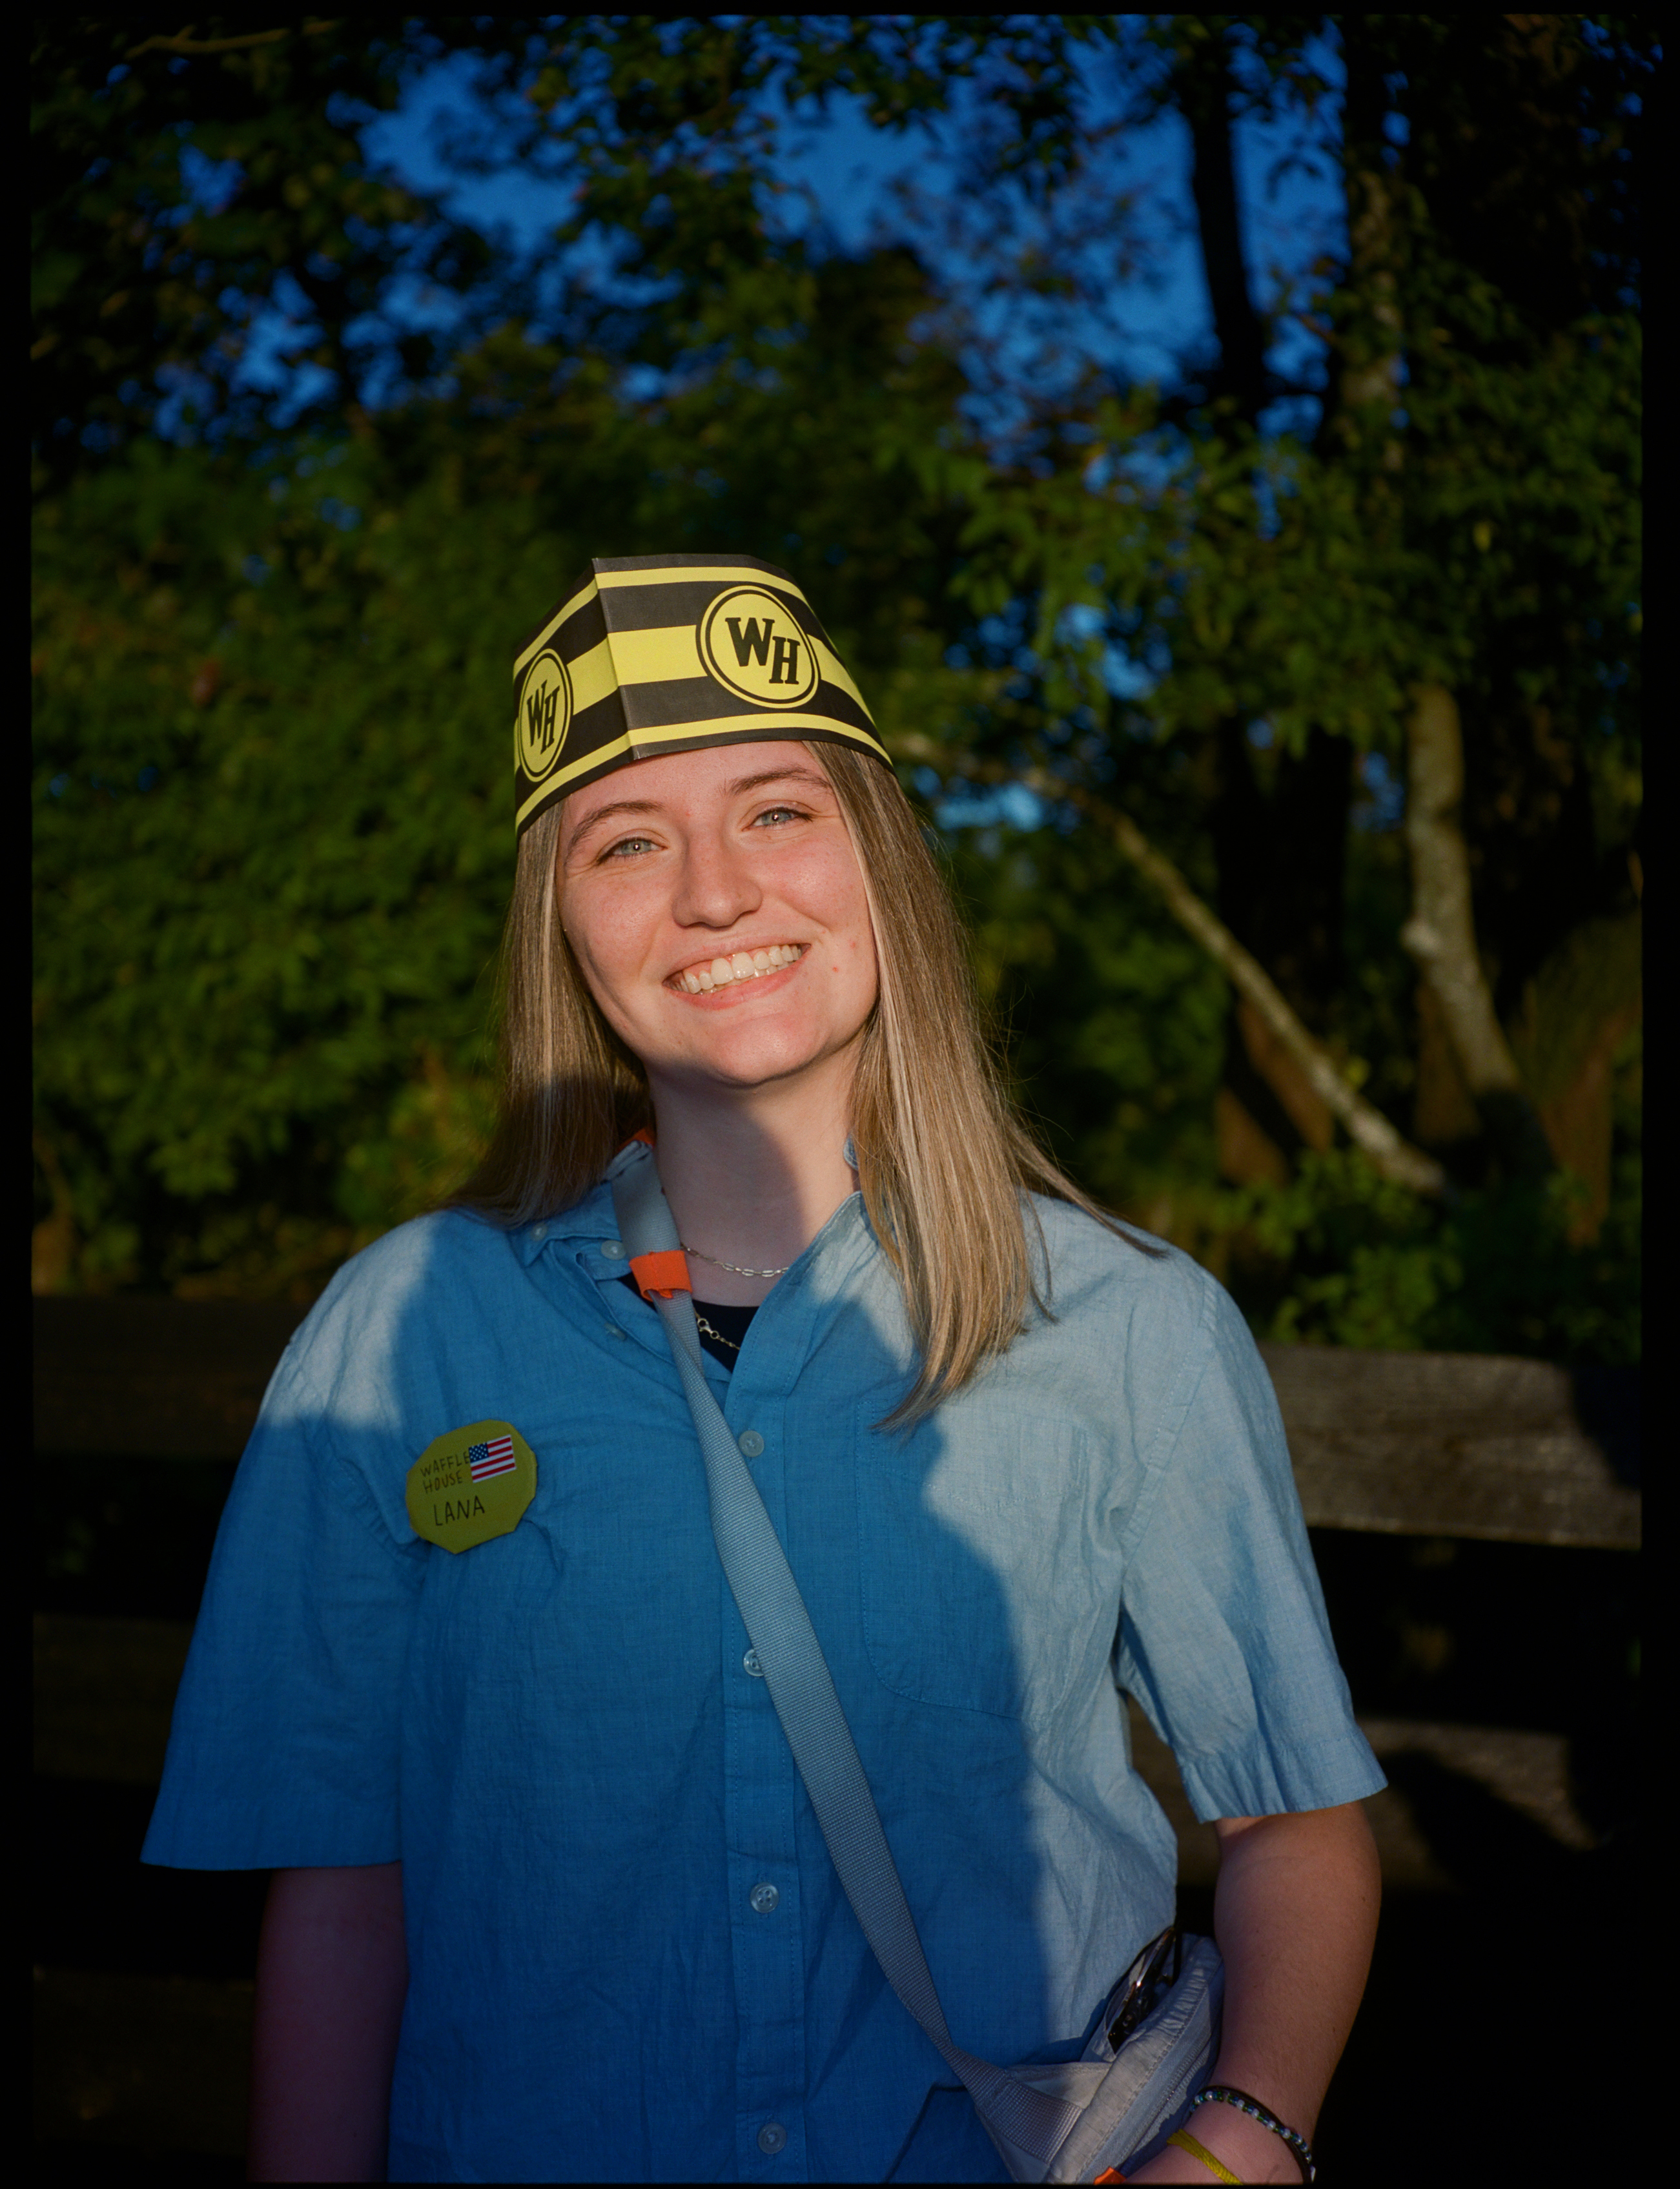 a lana del rey fan dressed up like she works in waffle house, with a blue shirt and a cap with the waffle house logo on it